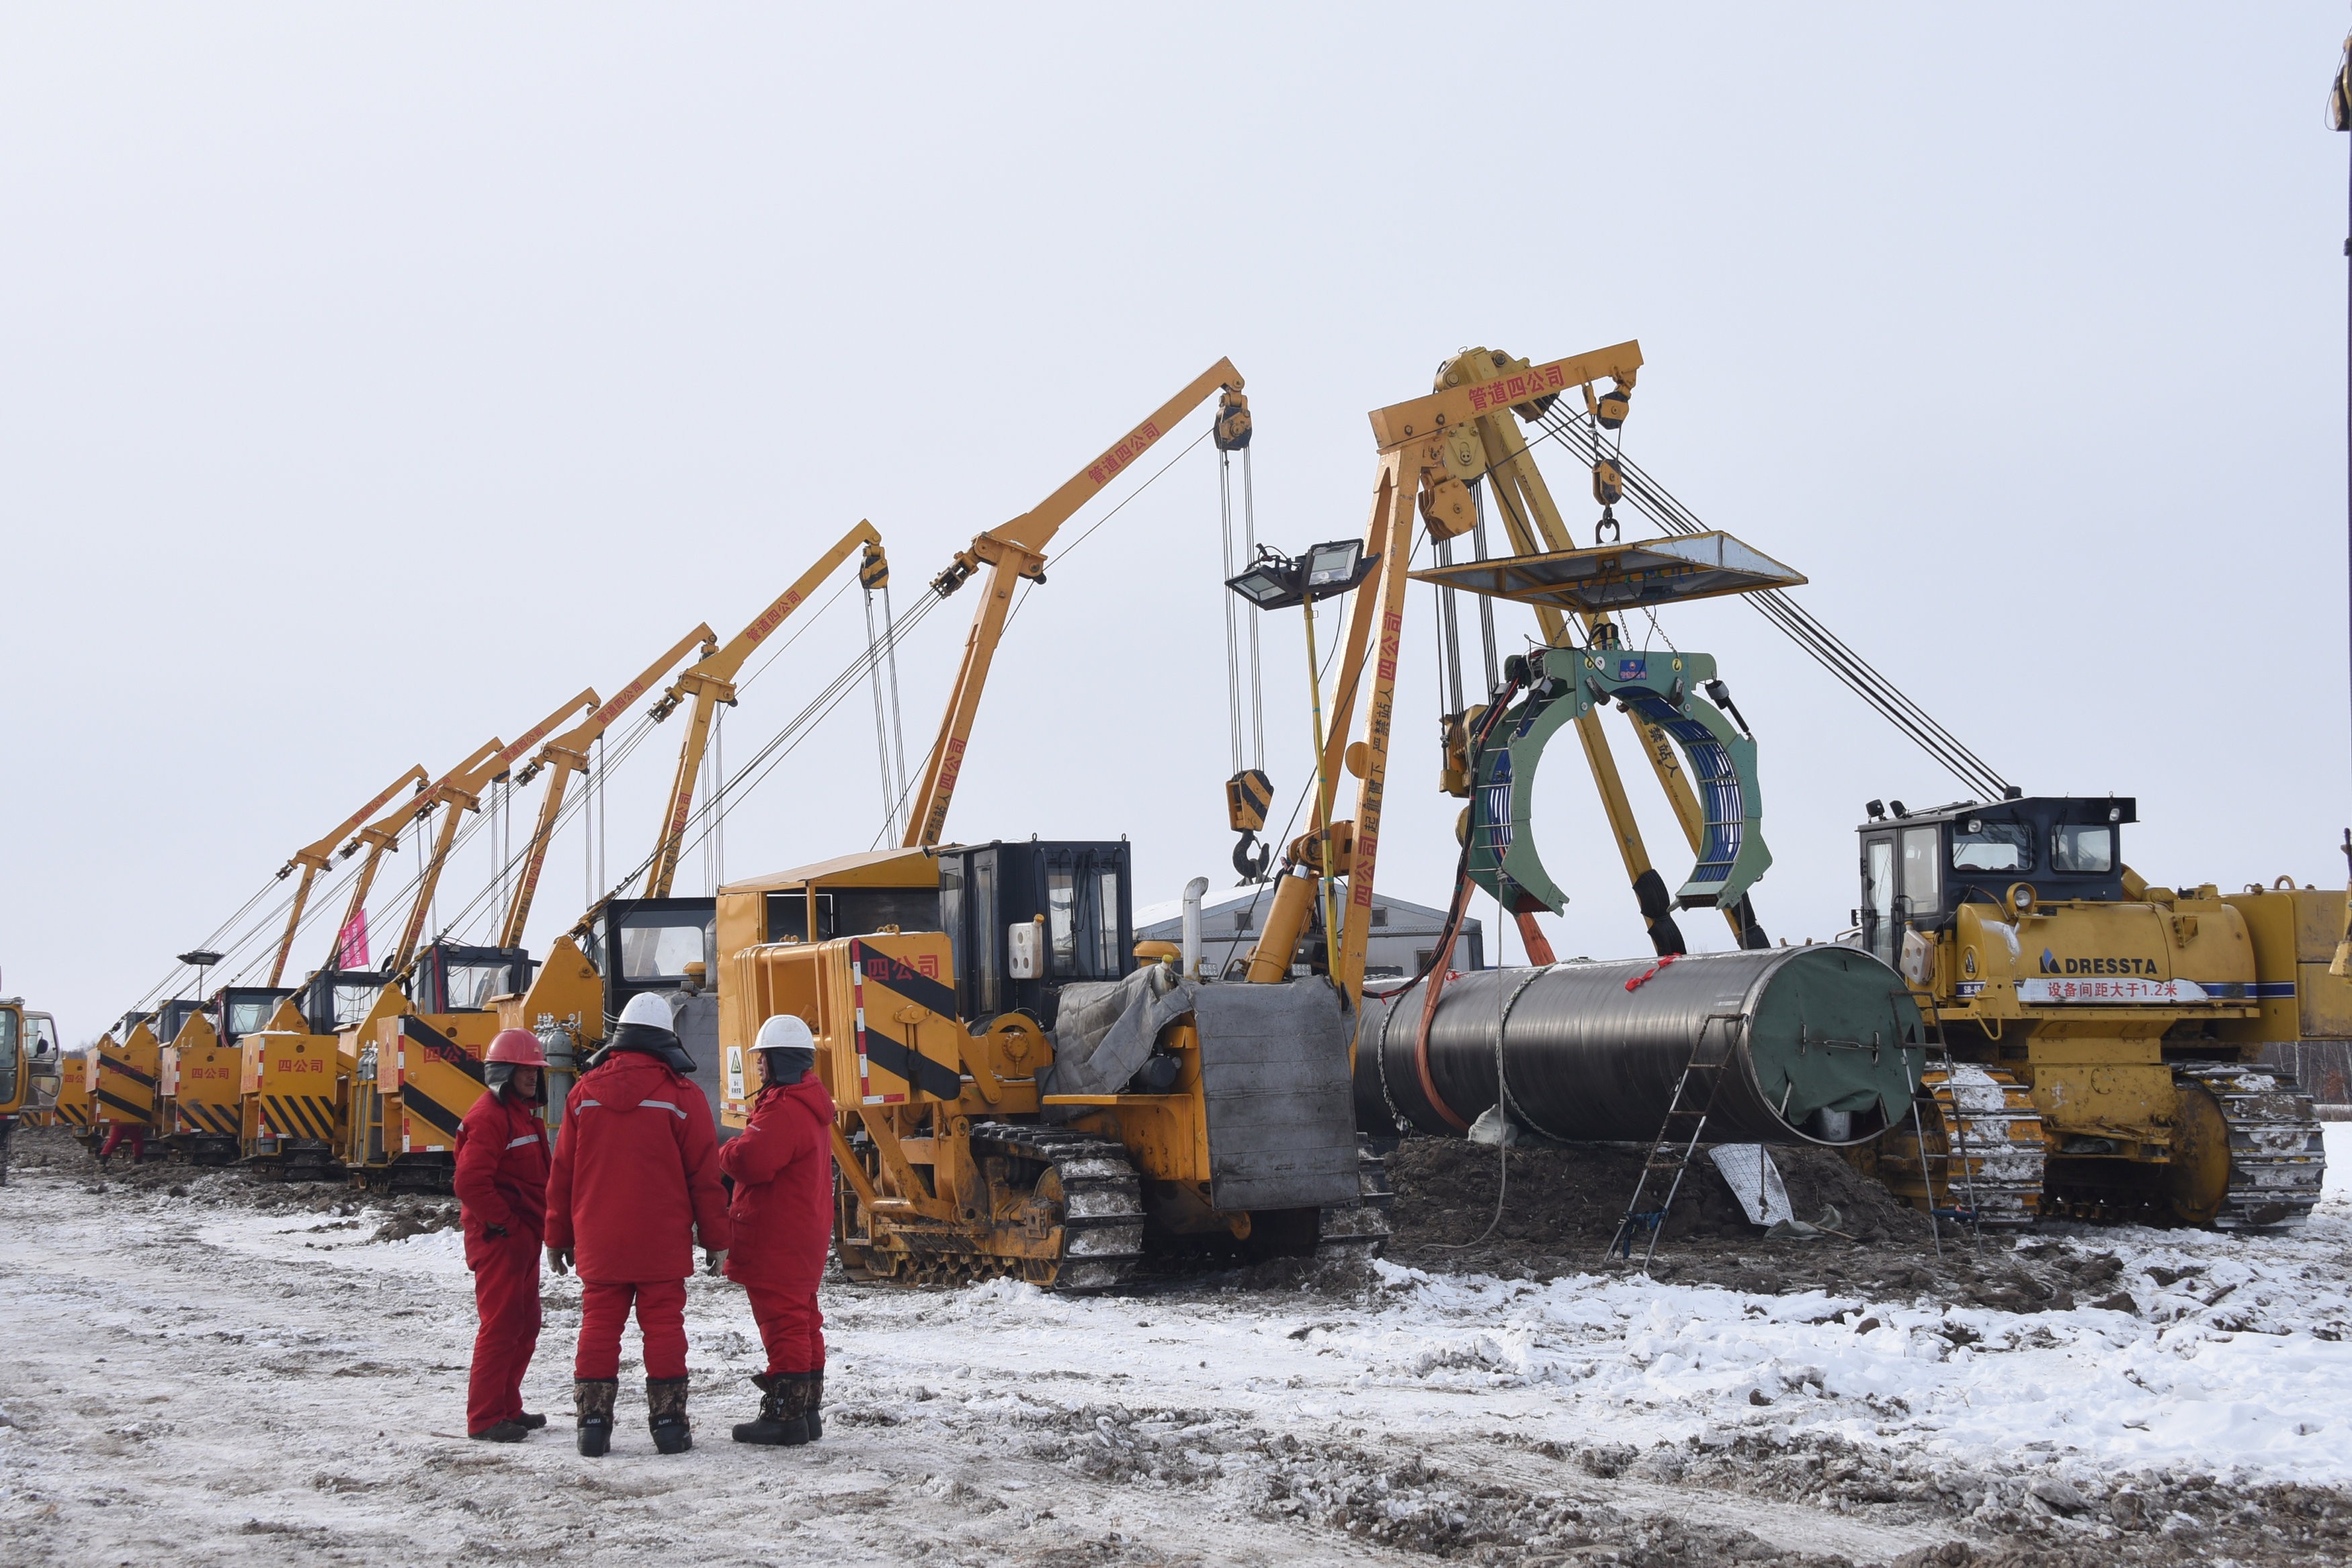 Workers of China National Petroleum Corporation (CNPC) at a construction site for laying natural gas pipelines connecting China and Russia, in Heihe prefecture of Heilongjiang province on China’s border with Russia on January 25, 2018. Photo: China Daily via REUTERS